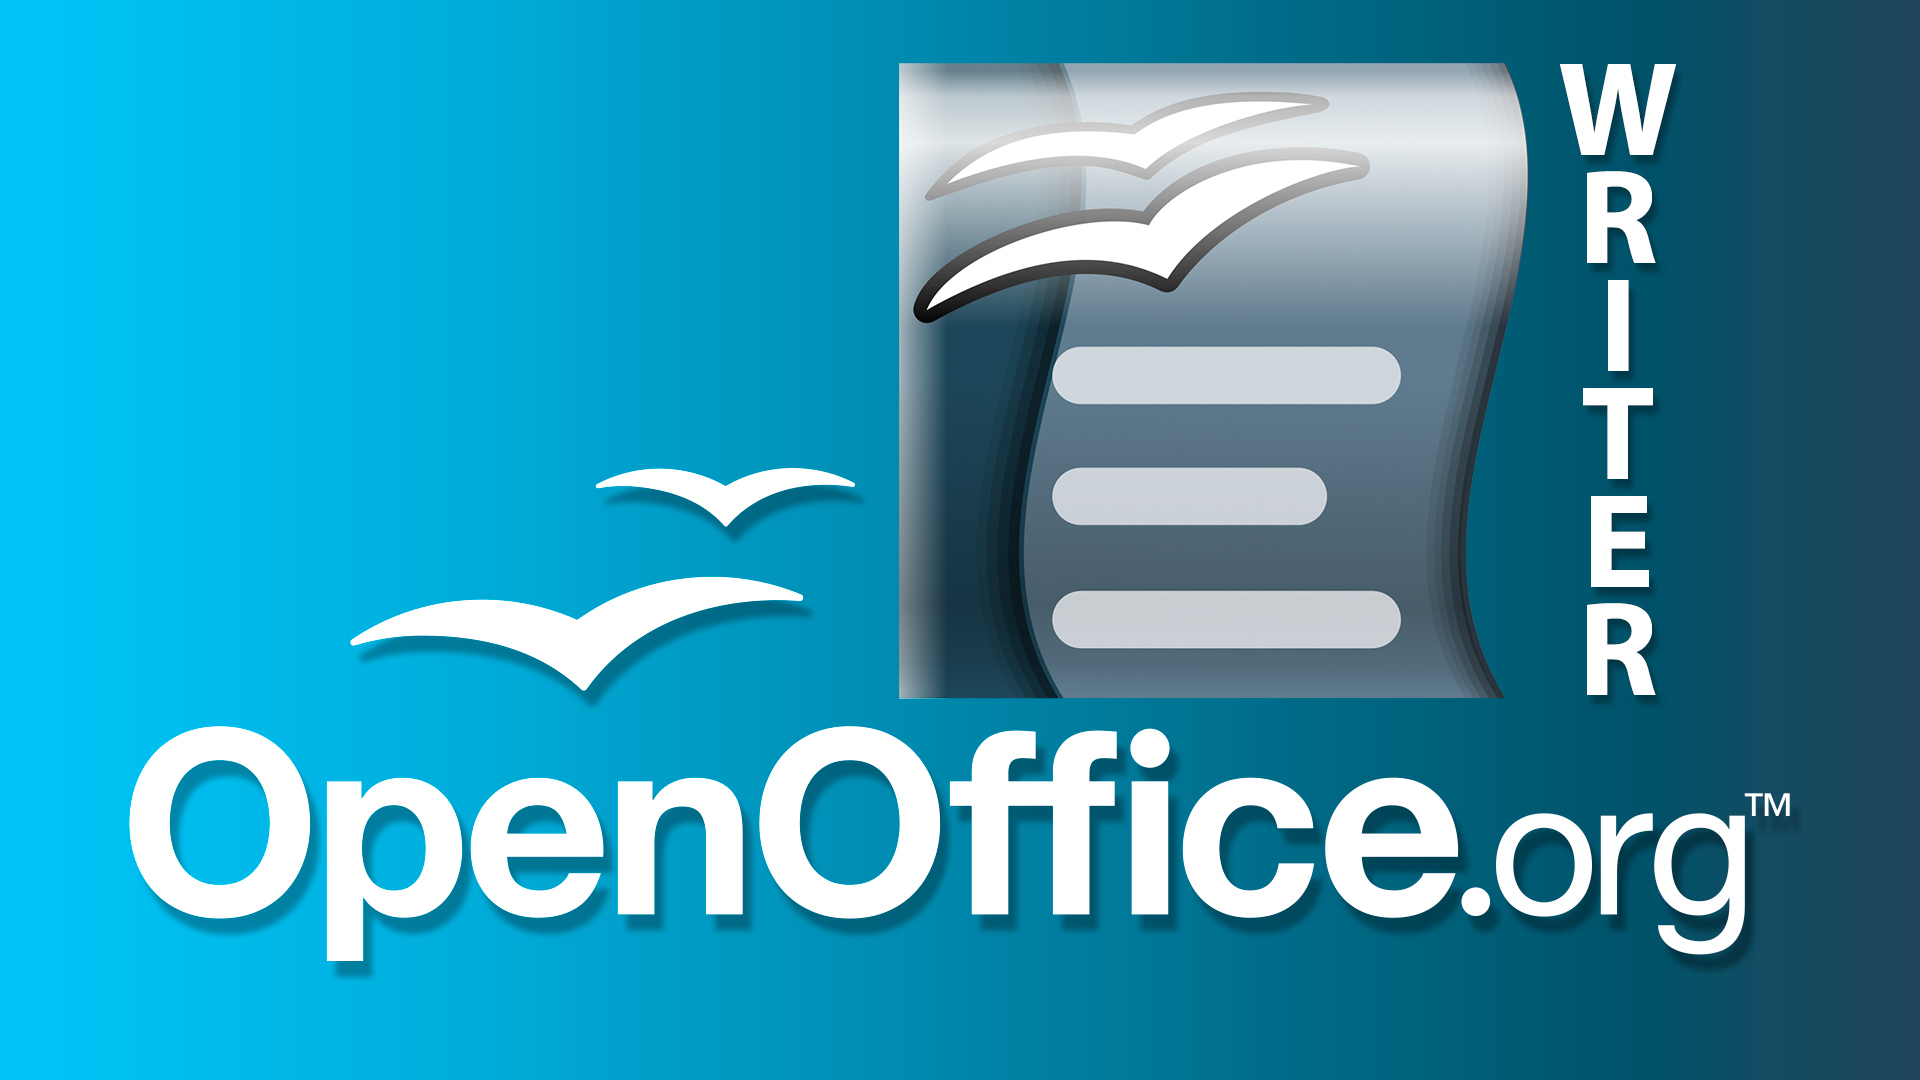 open office writer is an example of which software